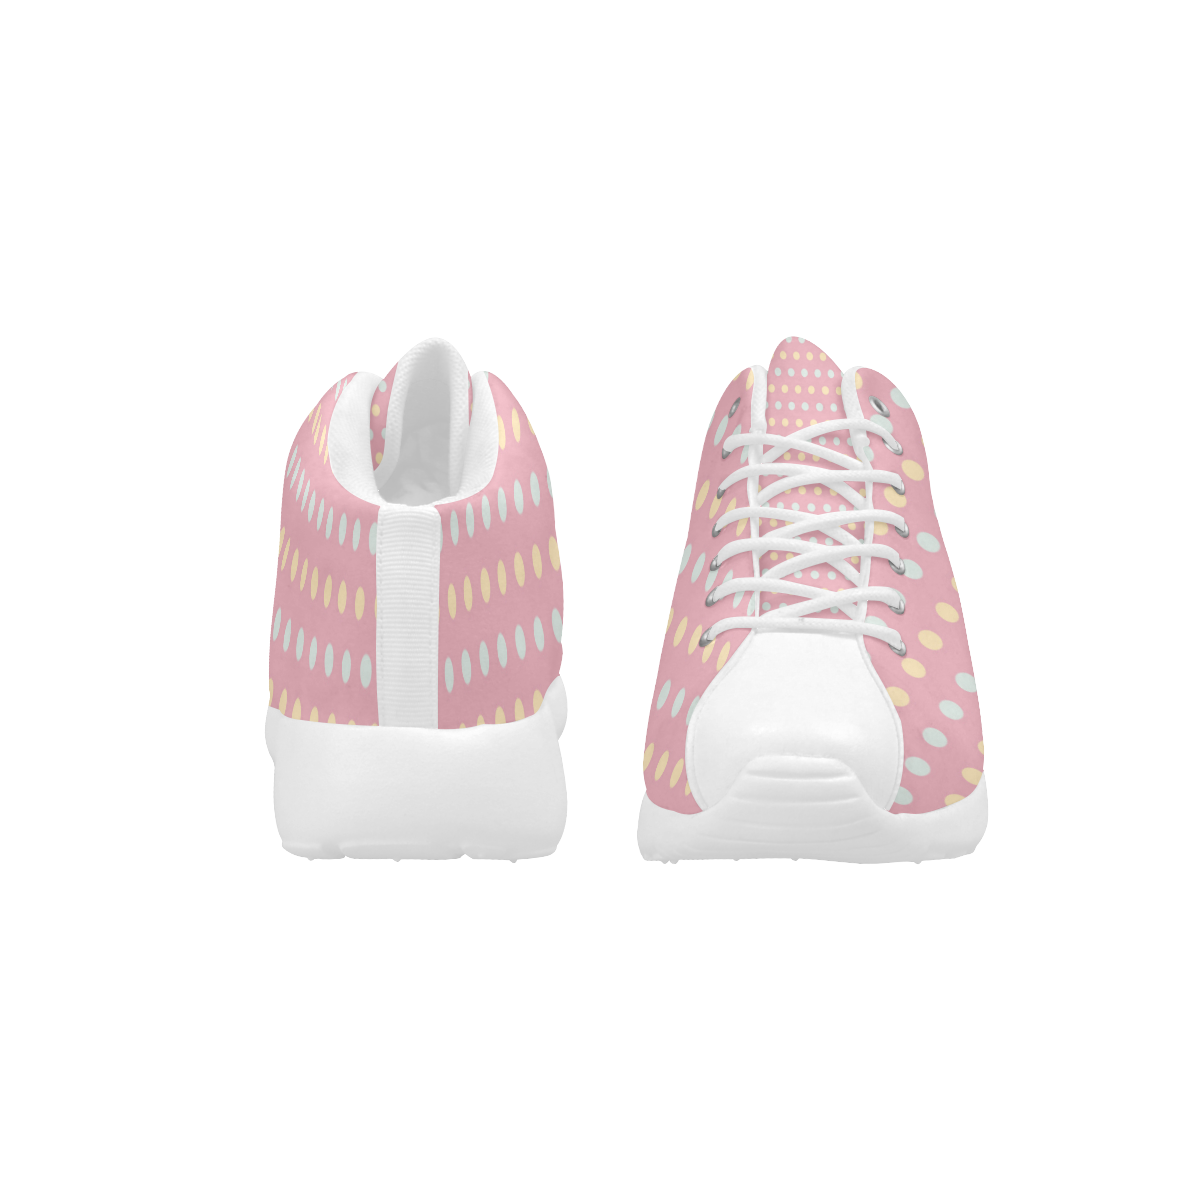 Colorful Dots On Pink Women's Basketball Training Shoes (Model 47502)